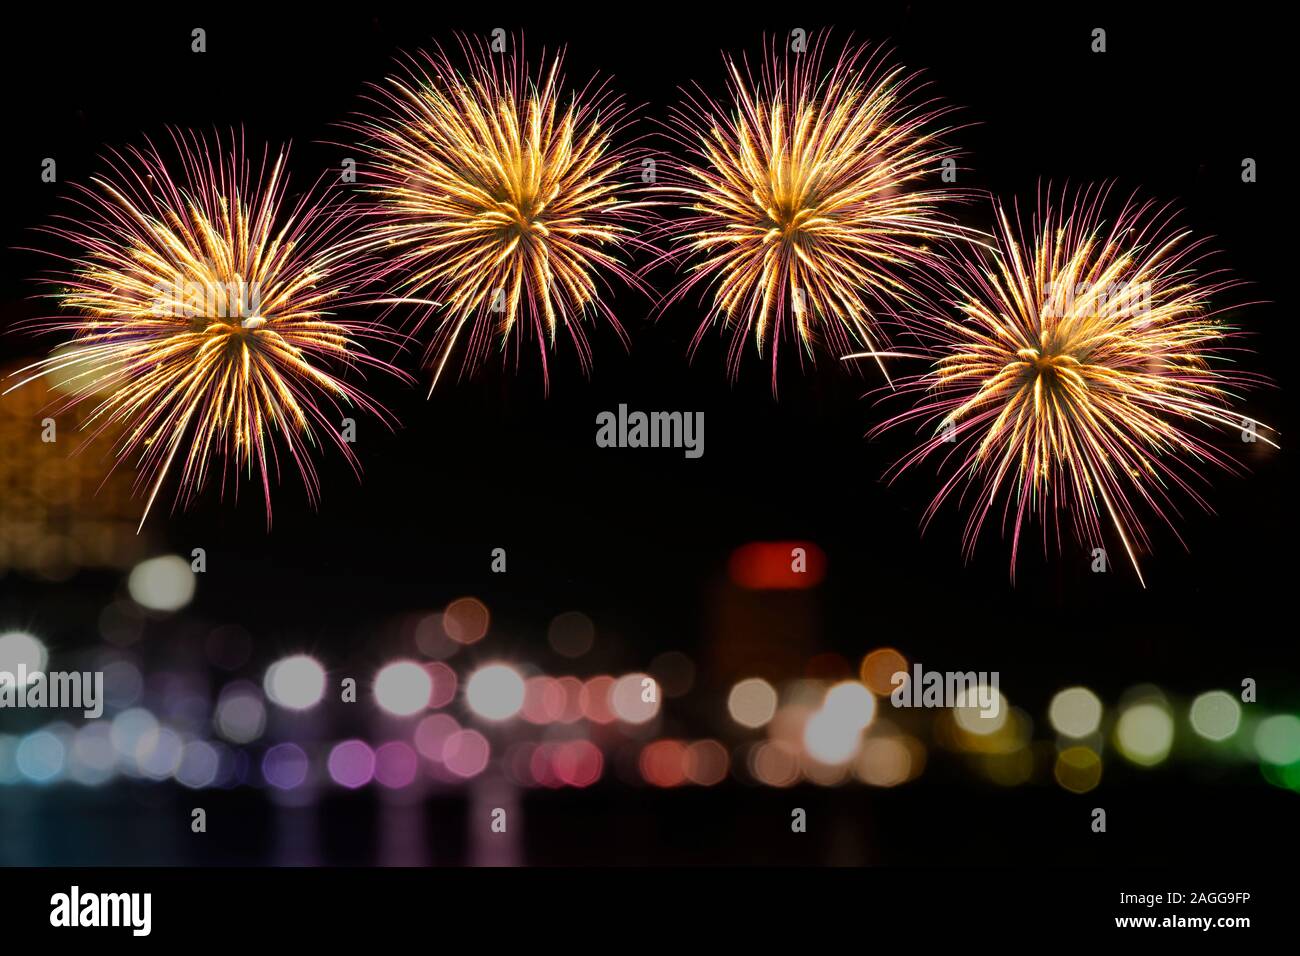 Colorful fireworks celebration on miidnight sky and the city night light background. Stock Photo